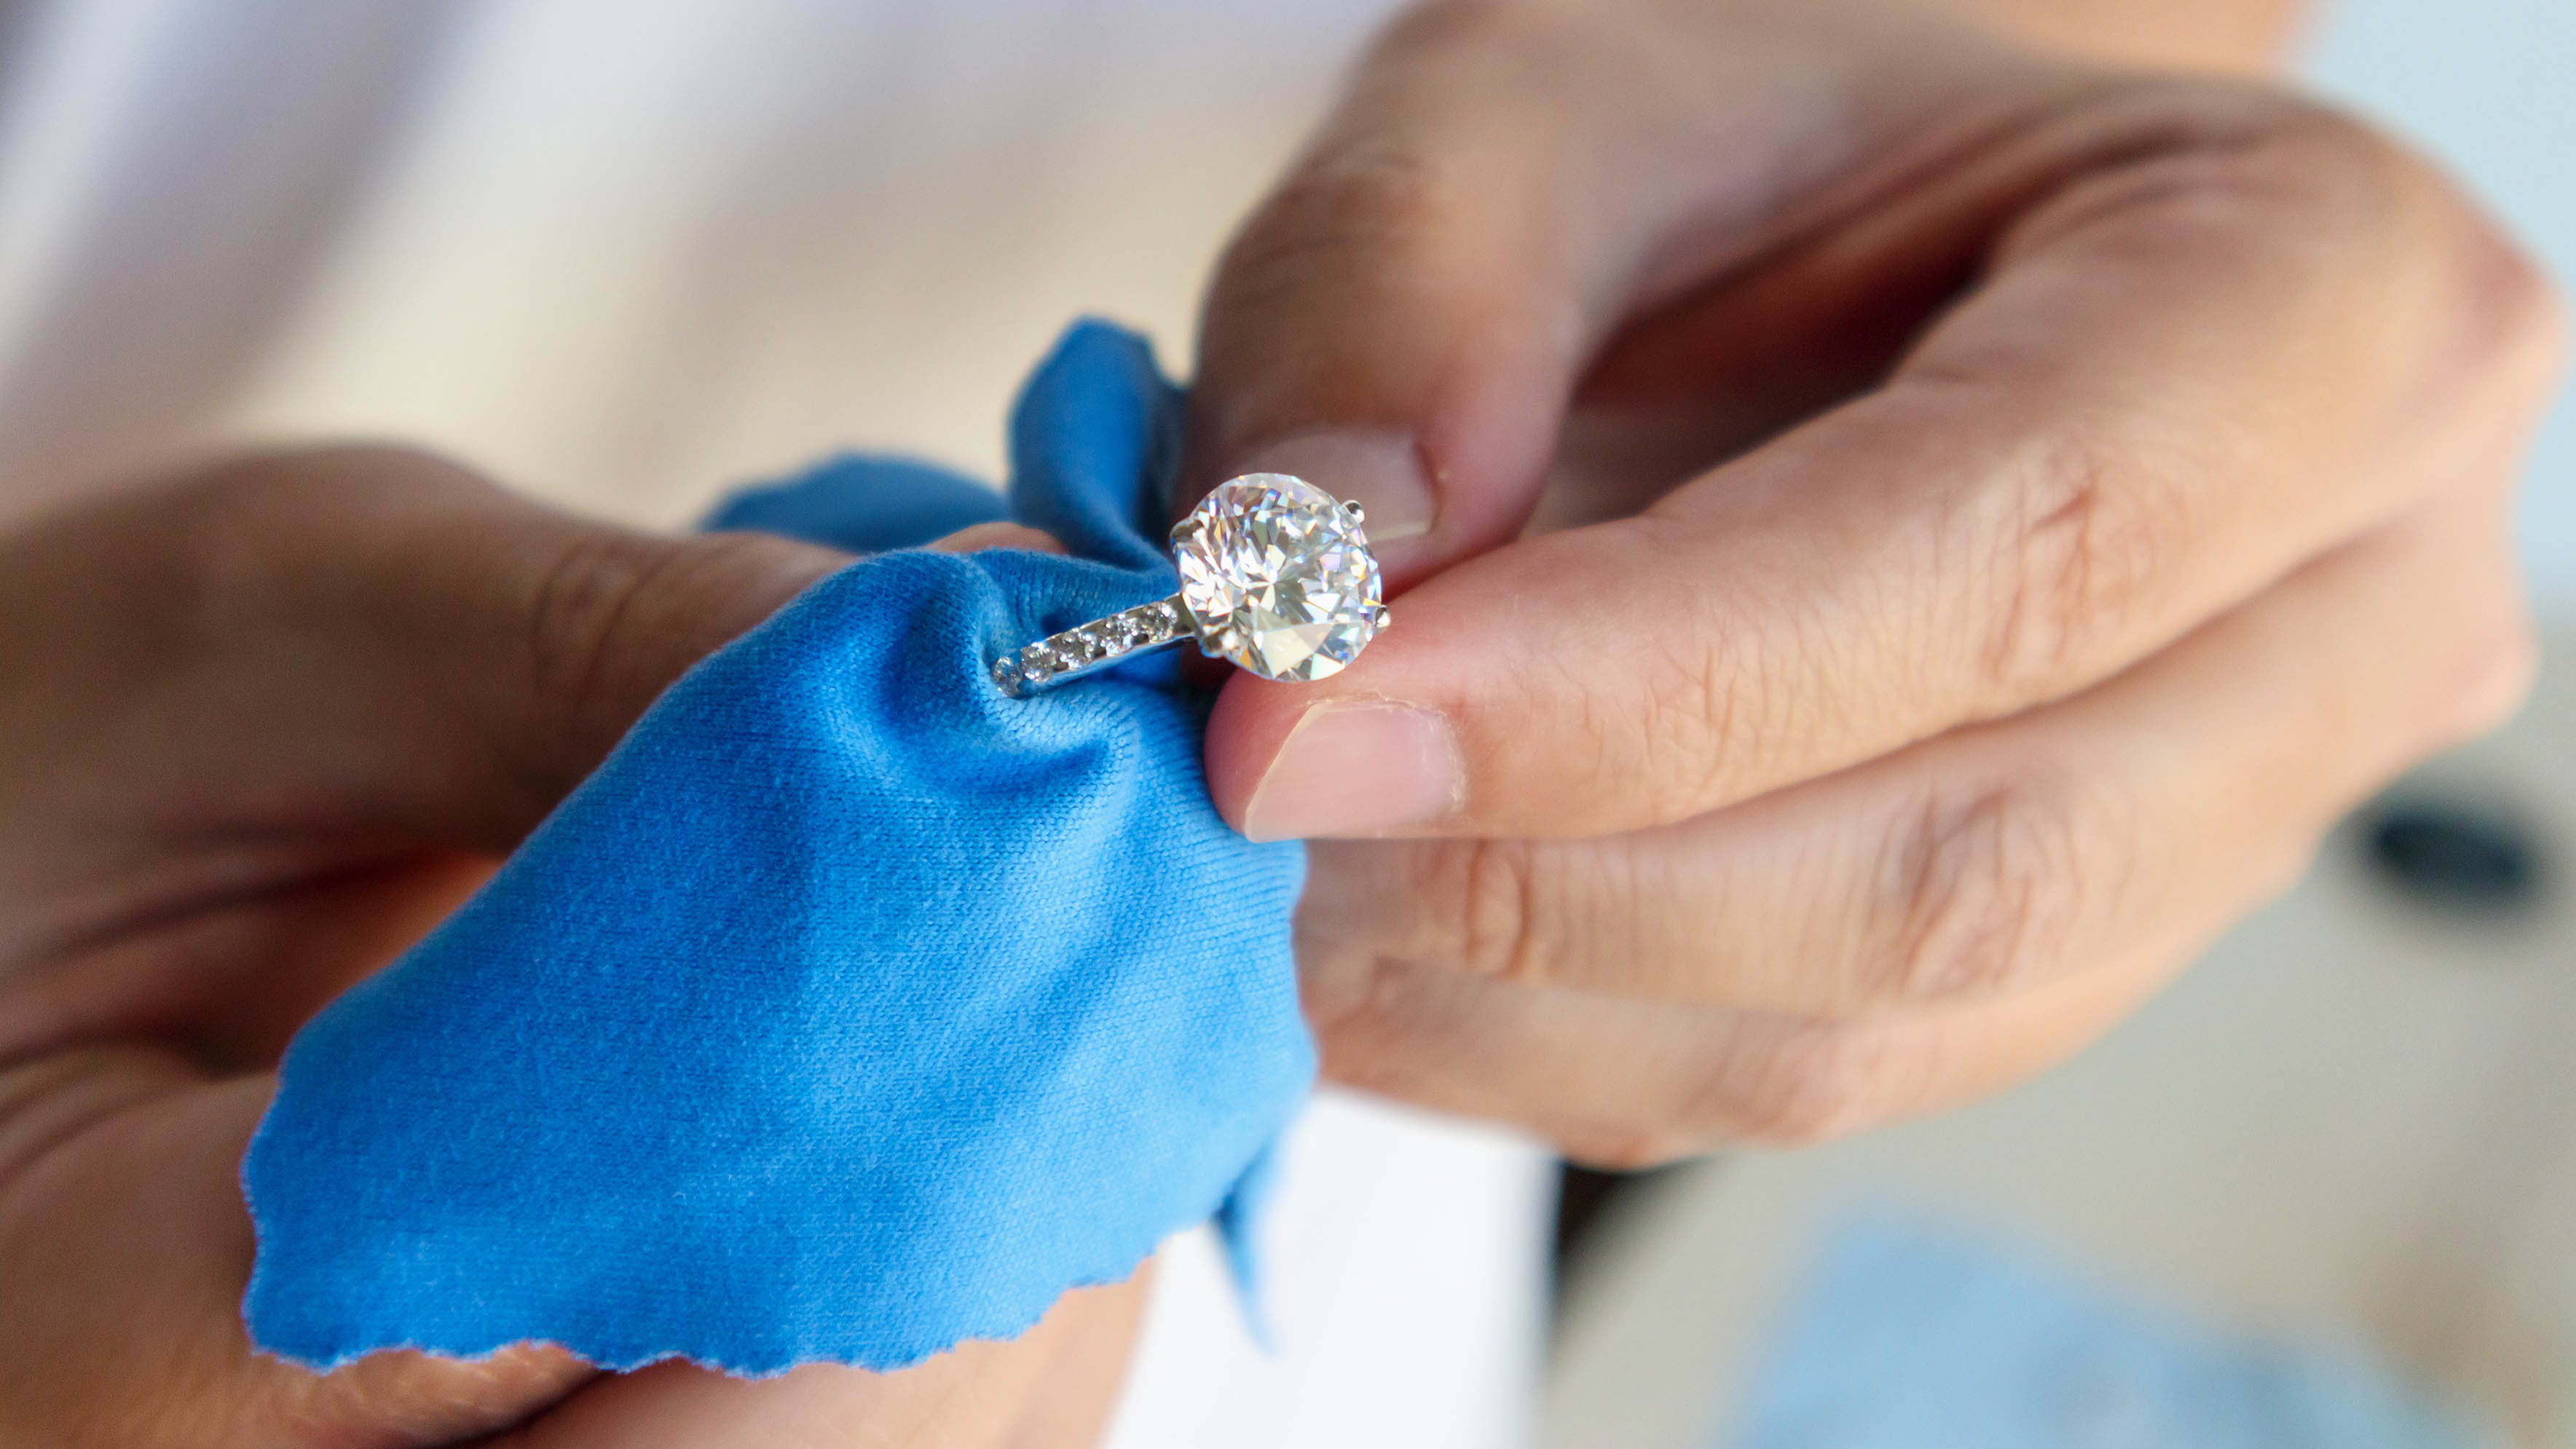 A person cleaning a round cut diamond ring with soft blue cotton